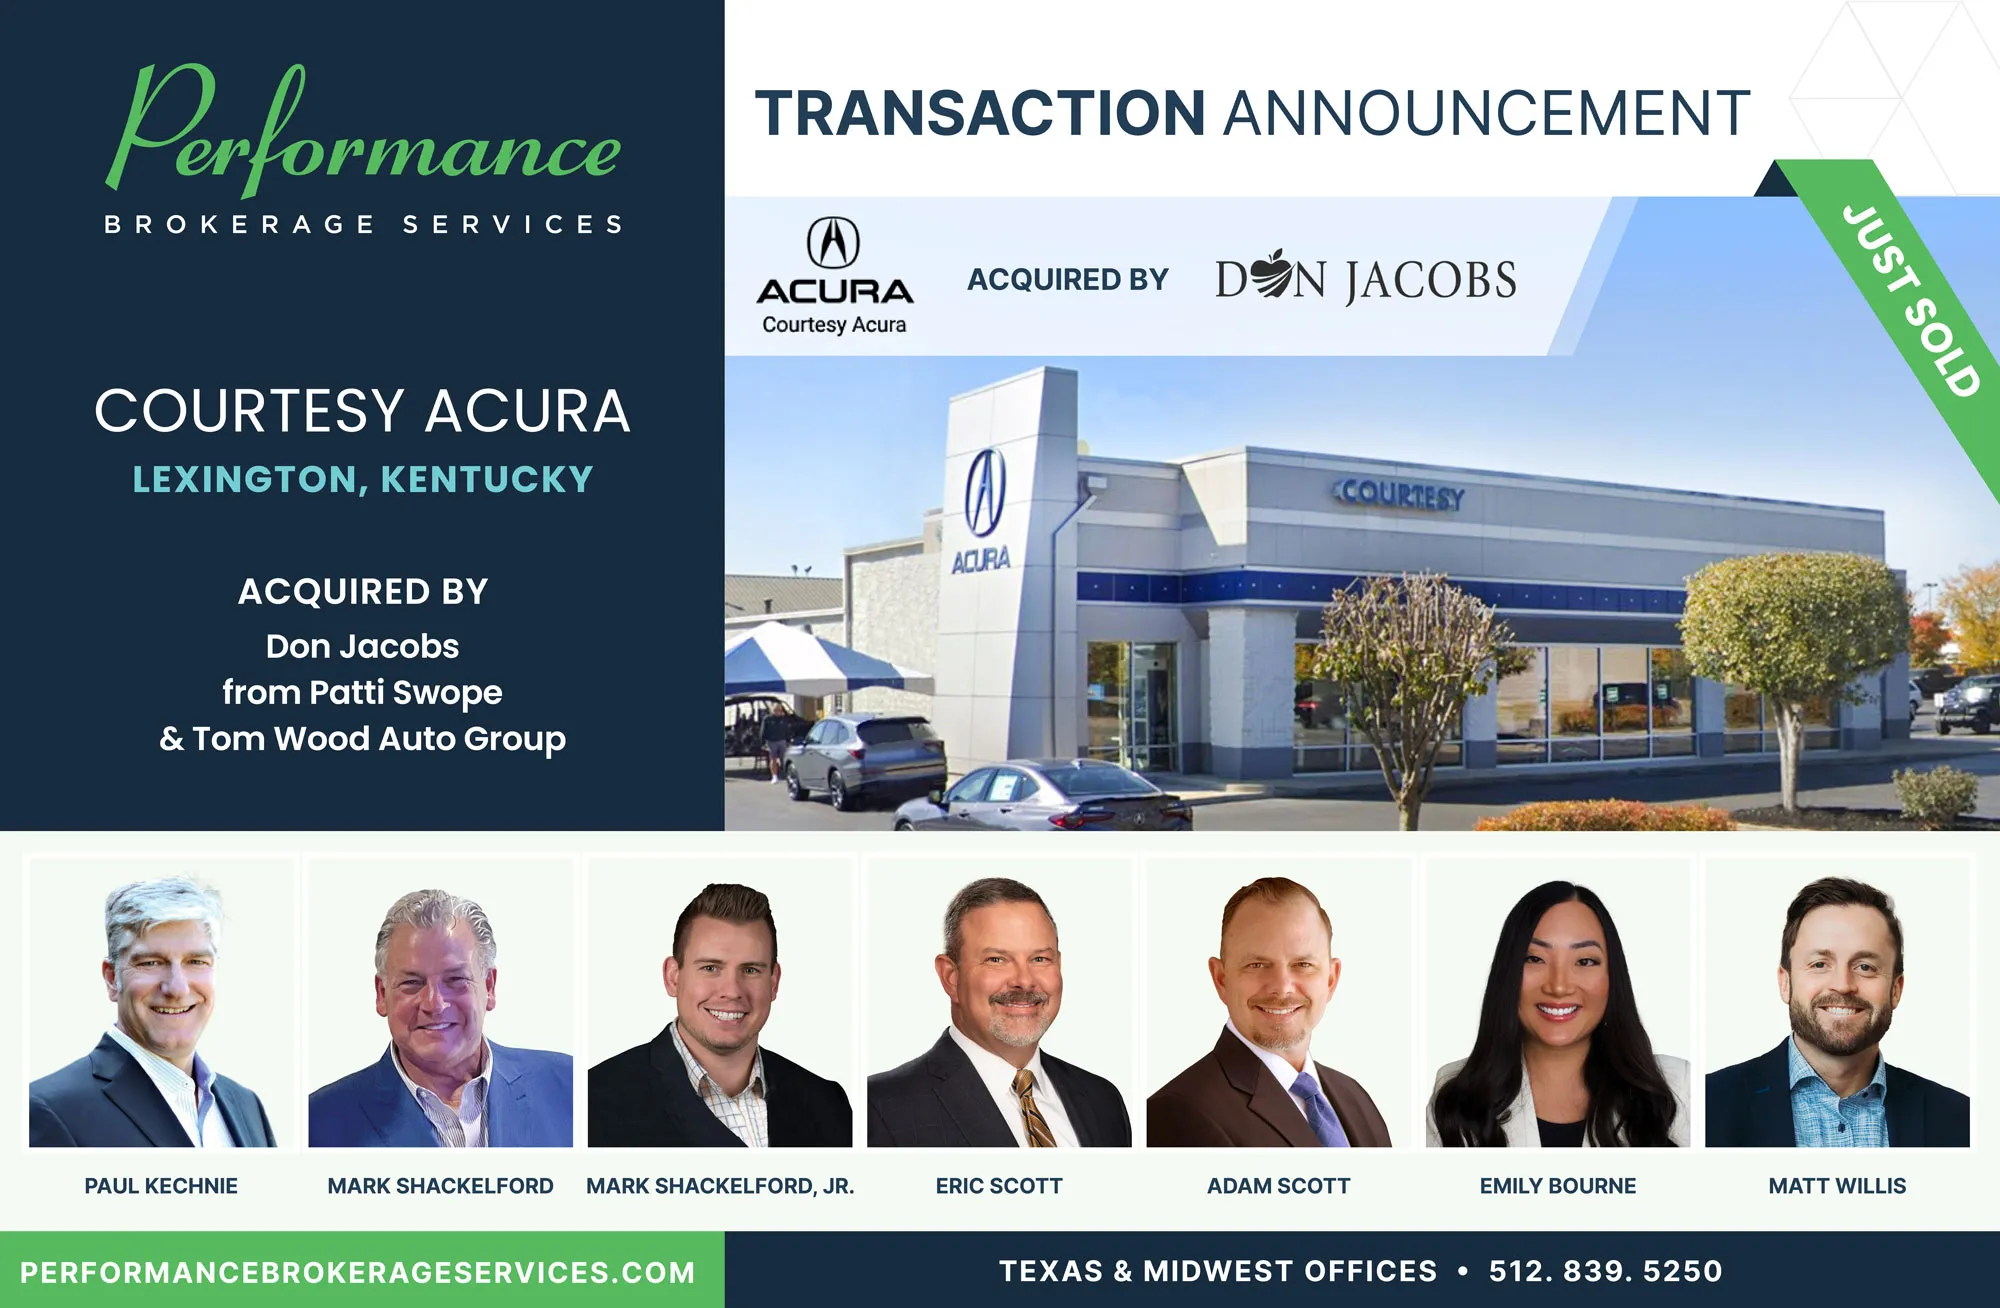 Courtesy Acura sells to Don Jacobs Auto Group with Performance Brokerage